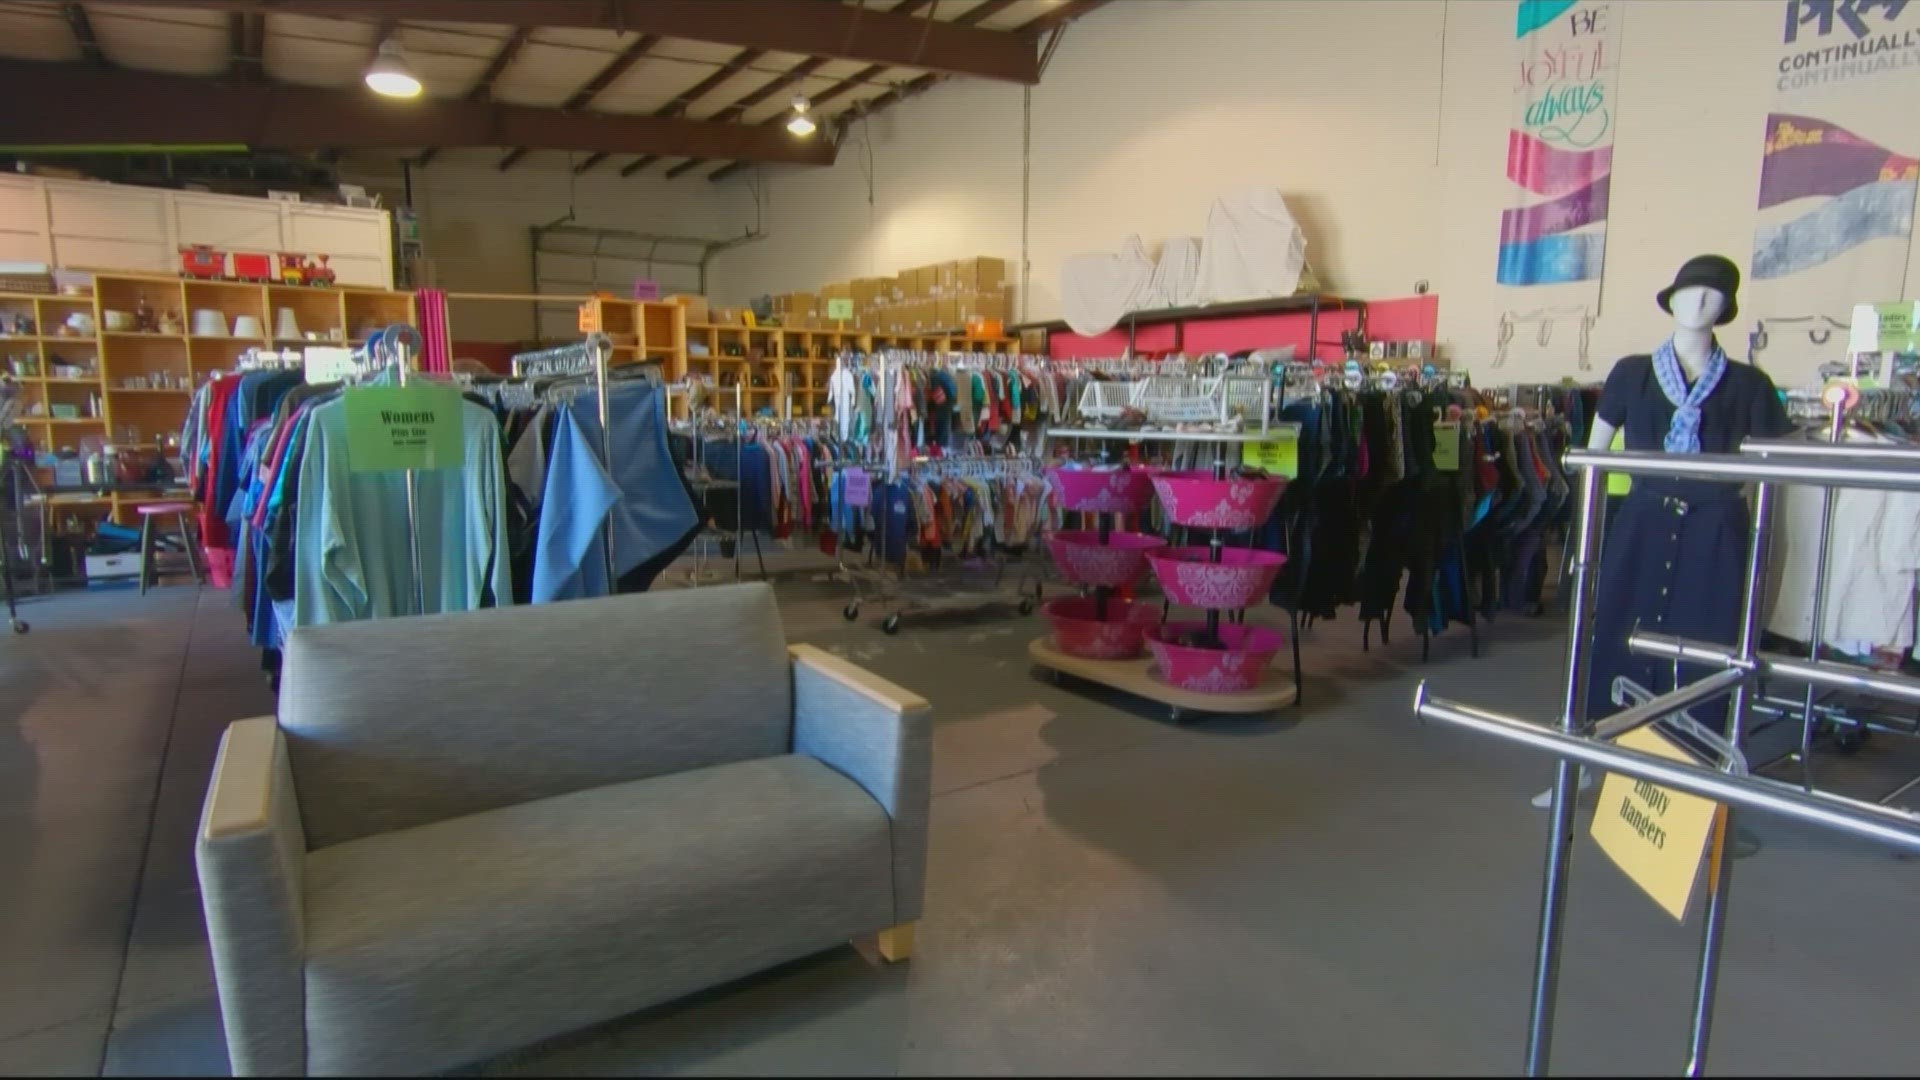 For over 23 years, The Giving Closet has served as a free community store for those in need. It's now at risk of closing after losing three major financial donors.